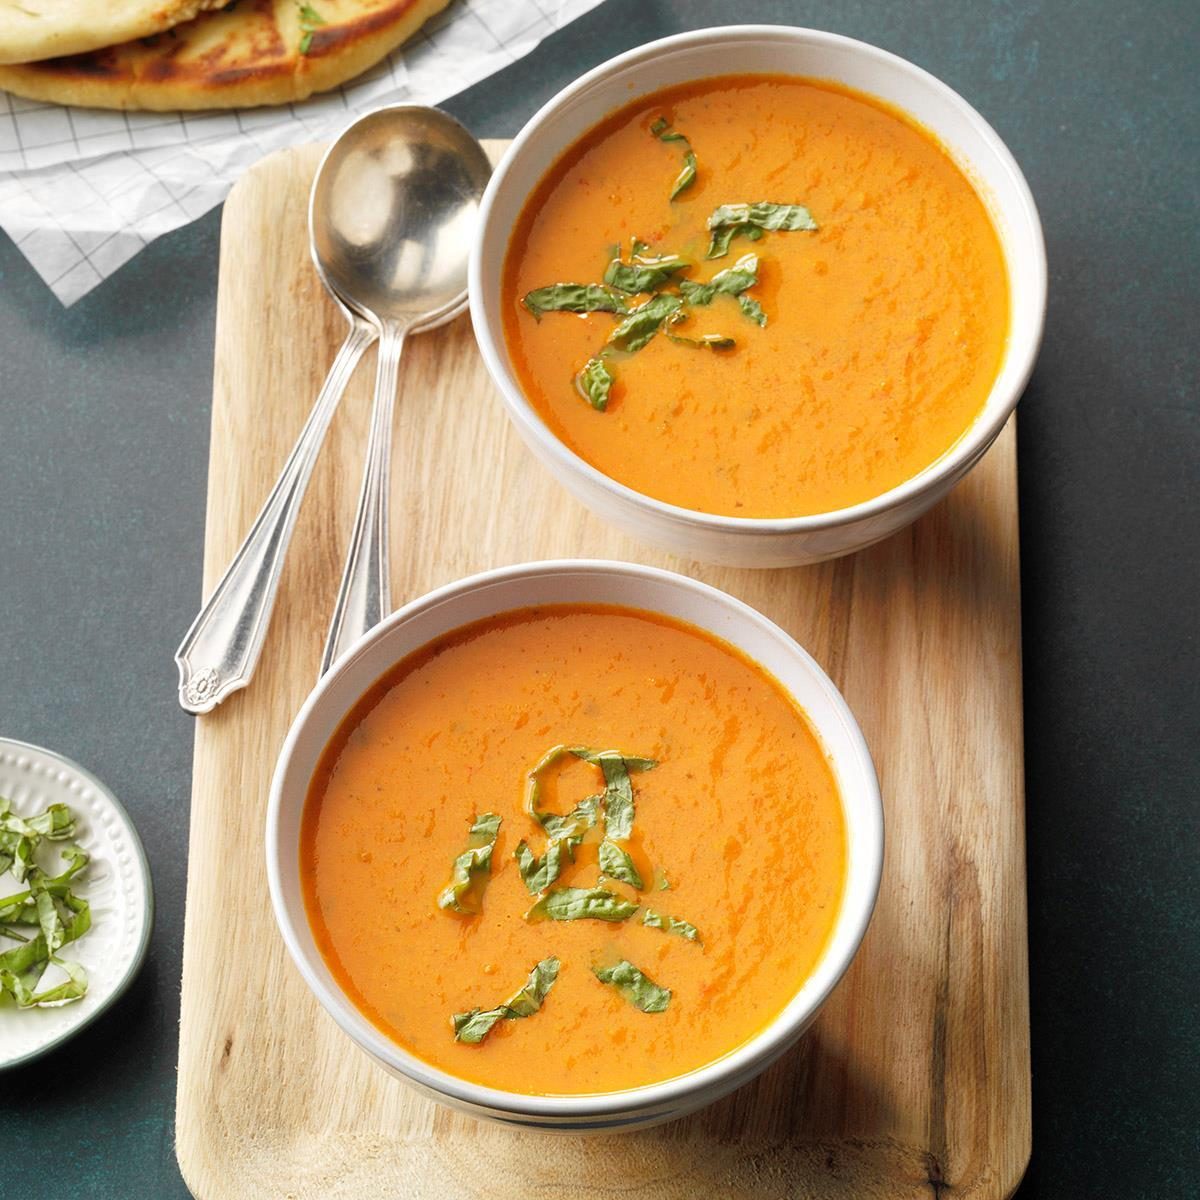 Smoky & Spicy Vegetable Bisque Recipe: How to Make It